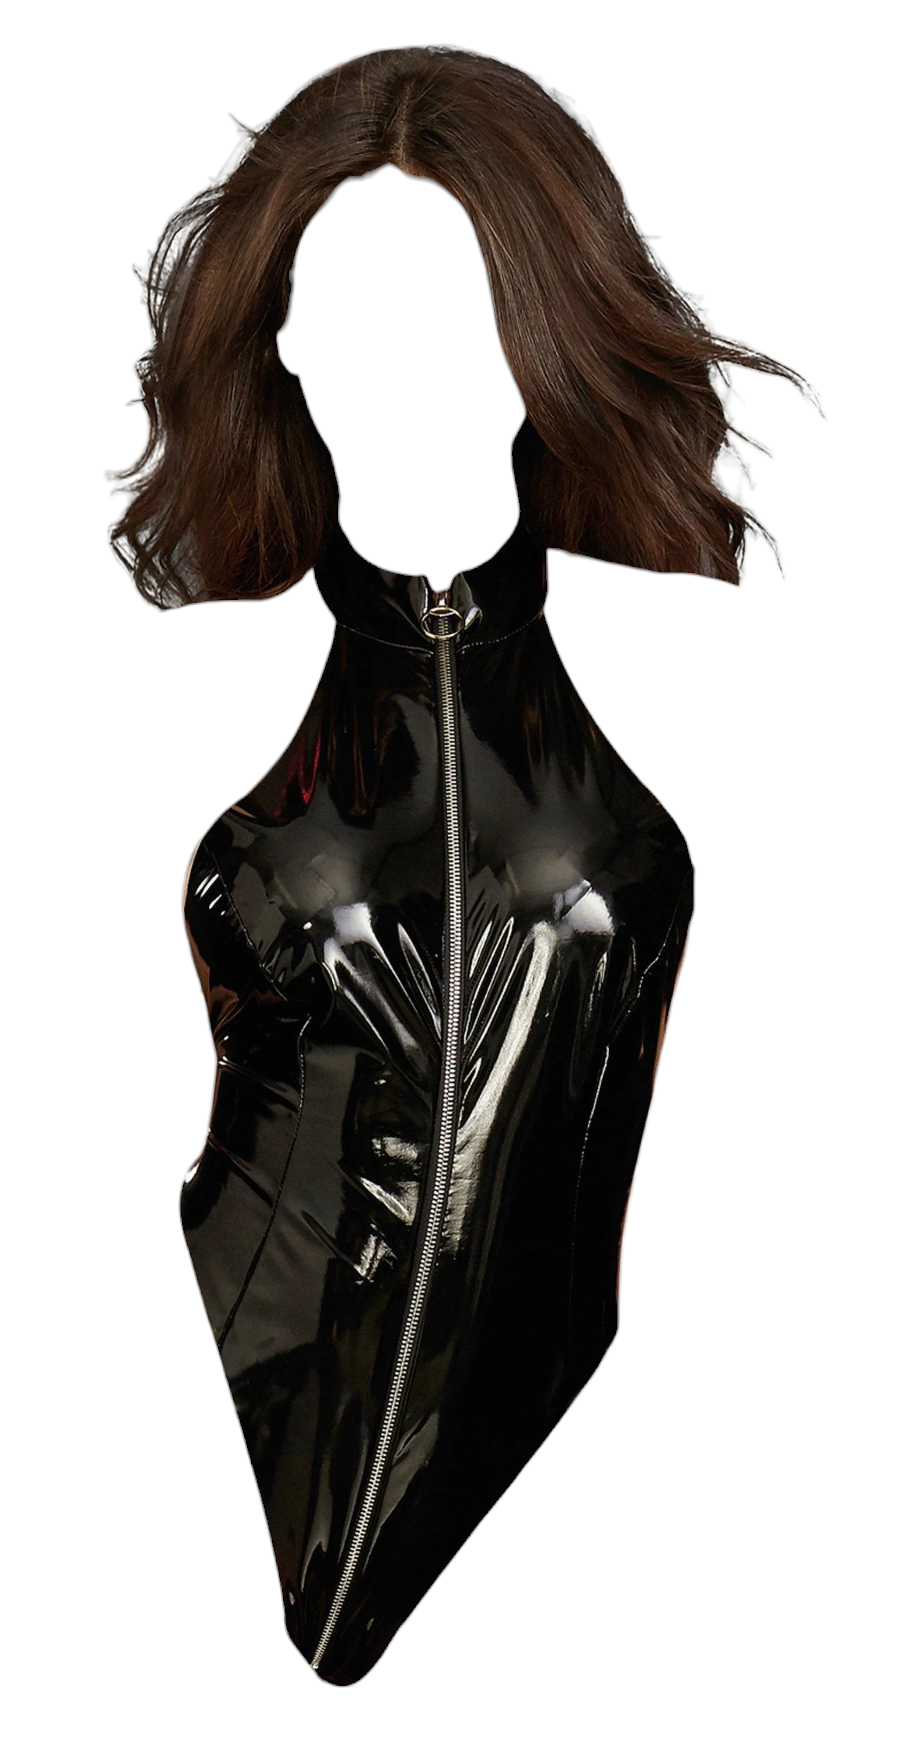 Dreamgirl Shiny Wetlook Vinyl High Neck Teddy with Zipper Front and Open Back Black One Size